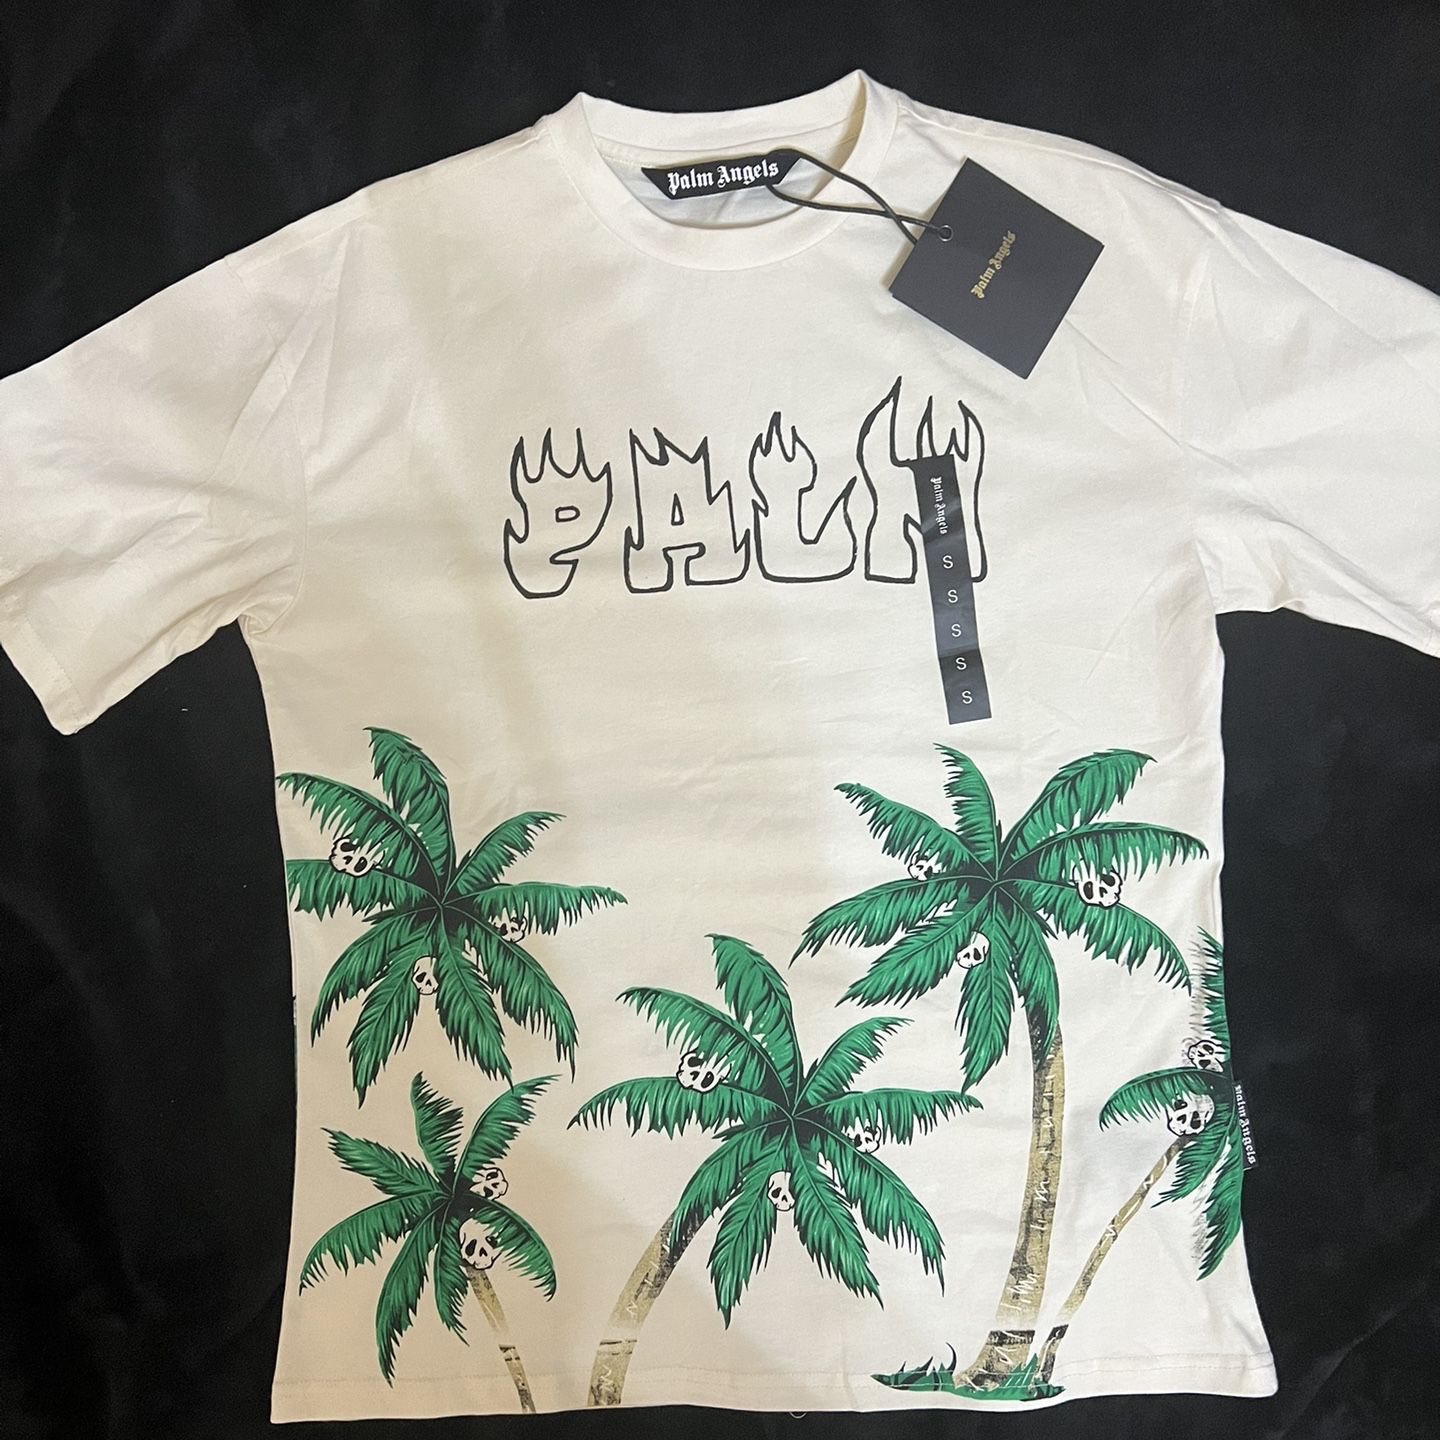 Palm Angels Palms And Skull Vintage Tee ‘White’ Brand New with Bag Size S